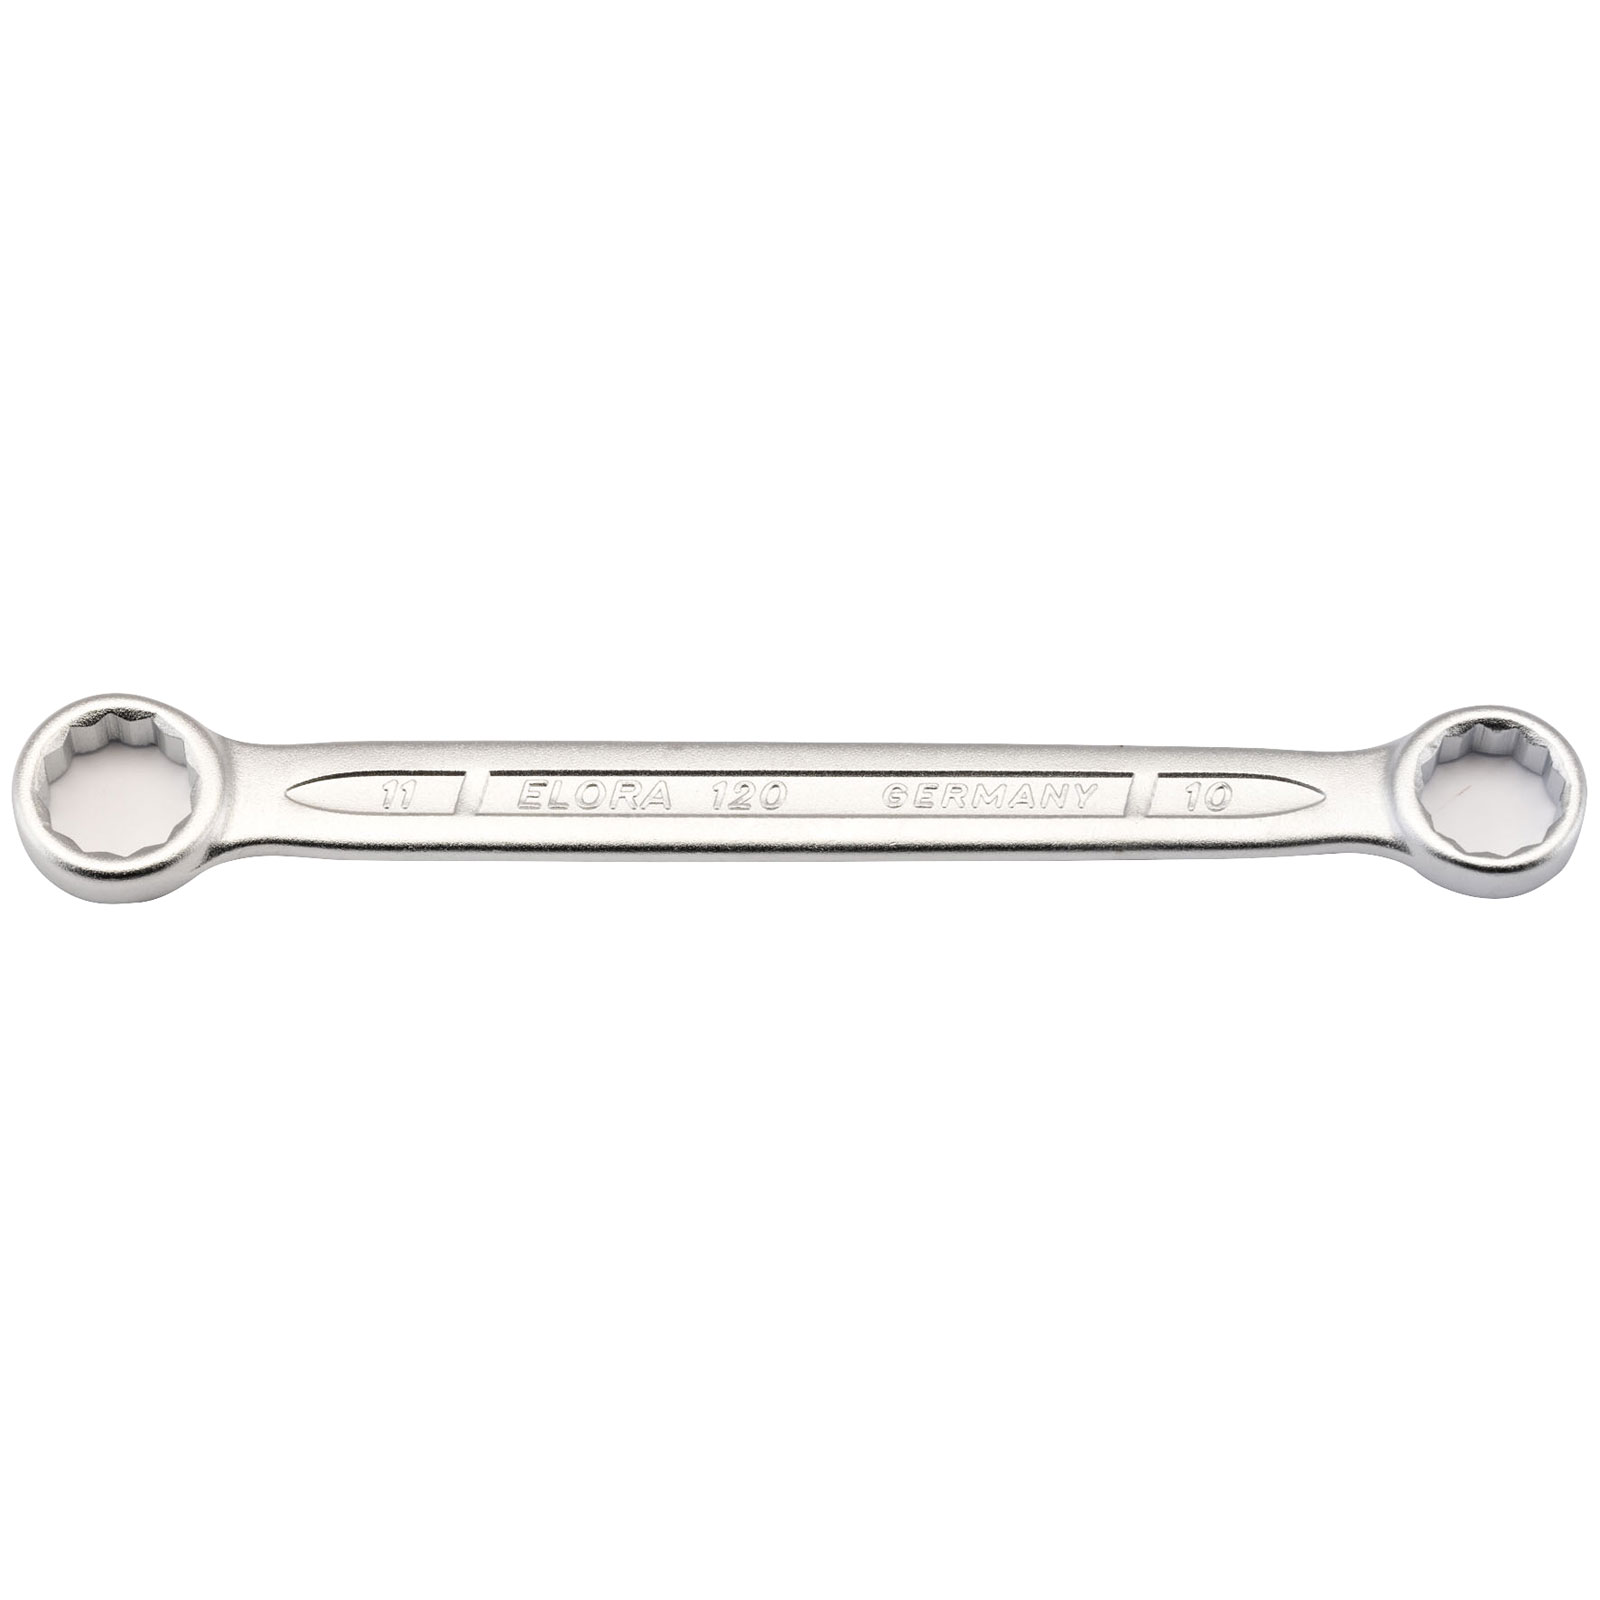 Stahlwille 41050810 8mm x 10mm Double Ended Ring Spanner